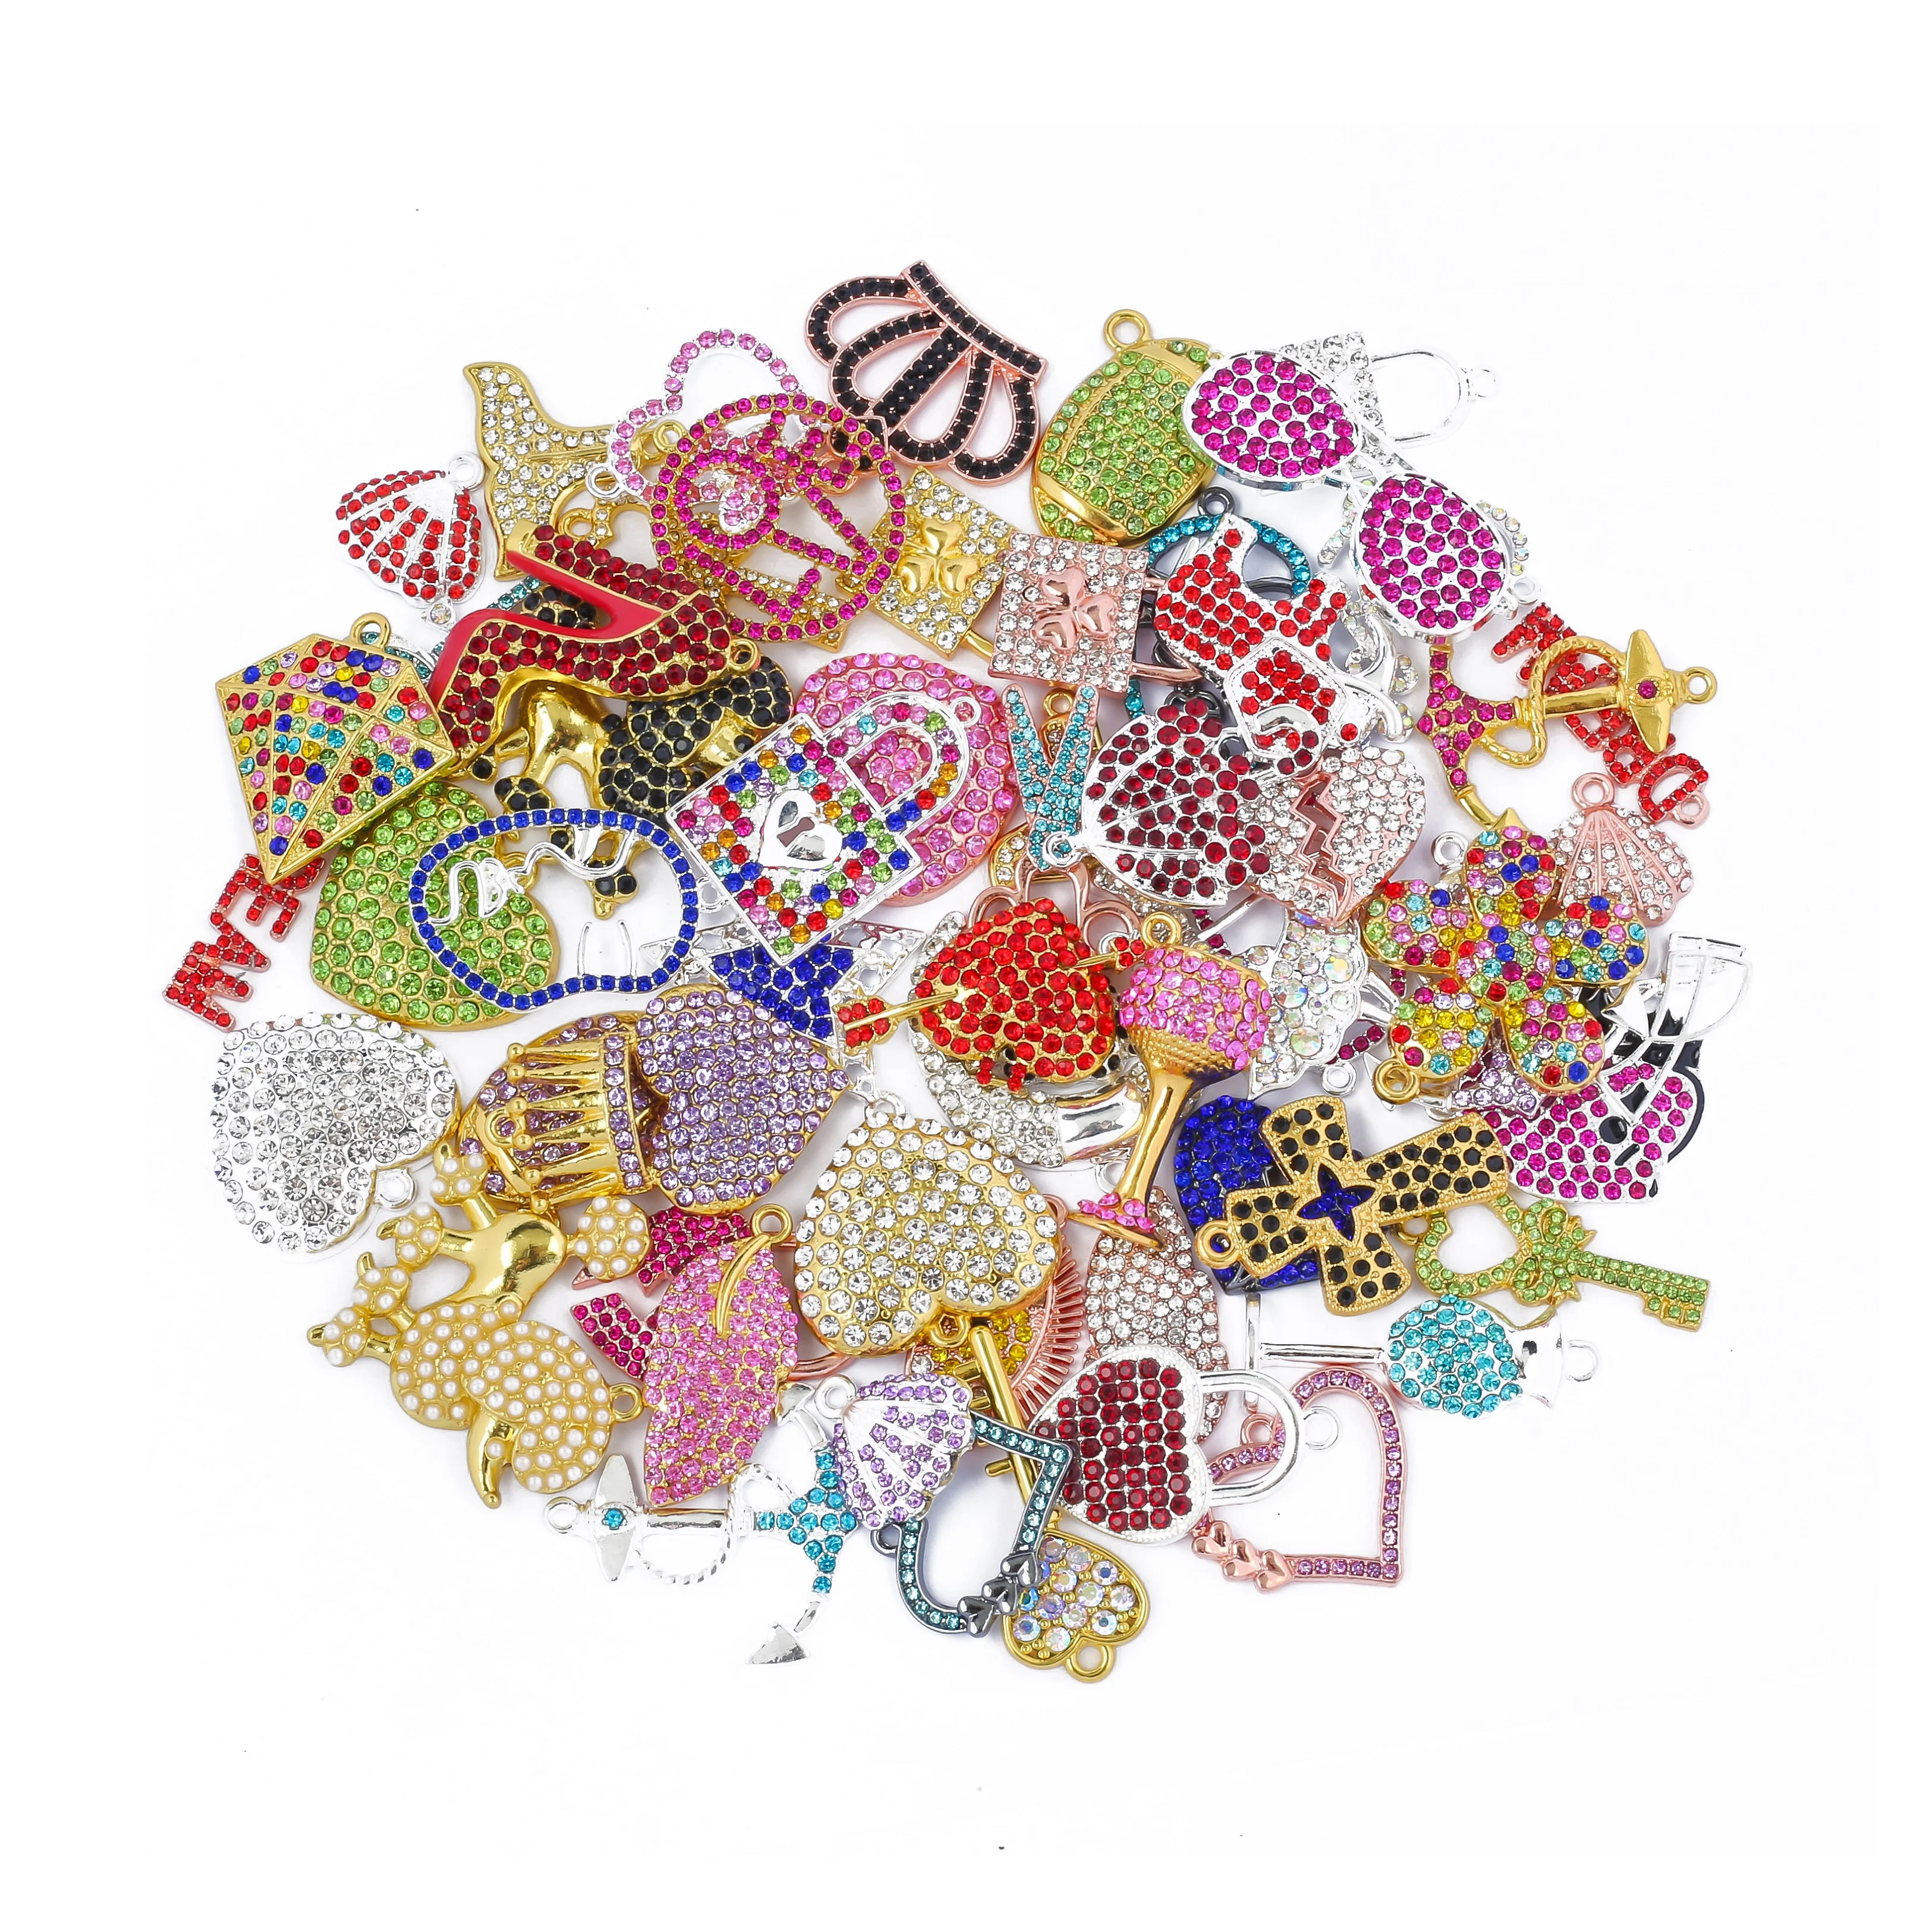 50pcs Mixed Fashion Charms Picked at Random Fit for Women's DIY Jewelry Accessories